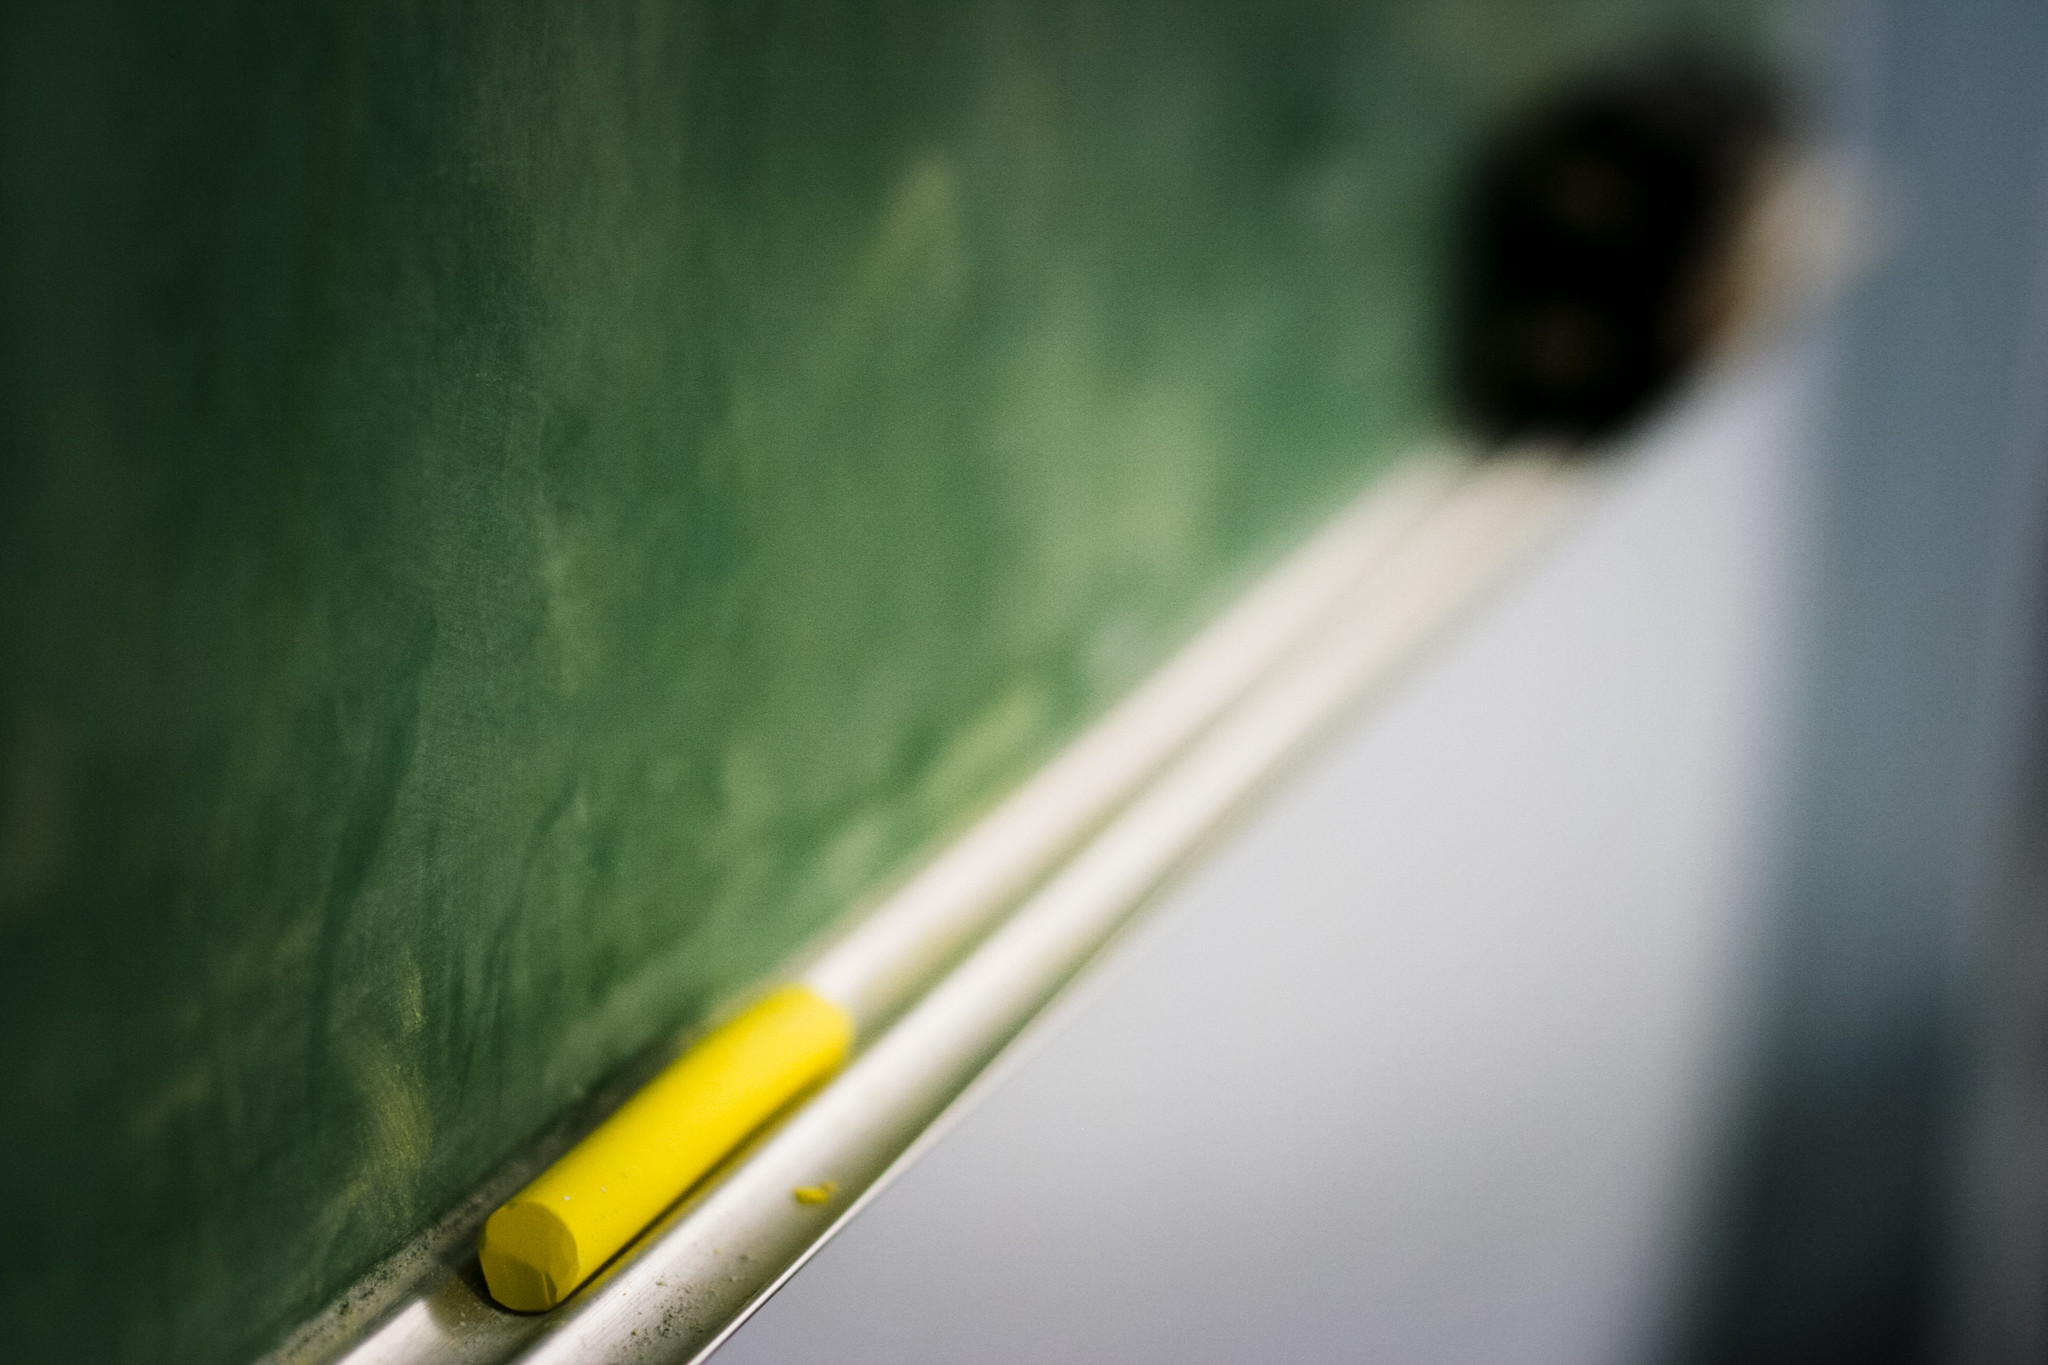 A closeup image of a traditional chalkboard.